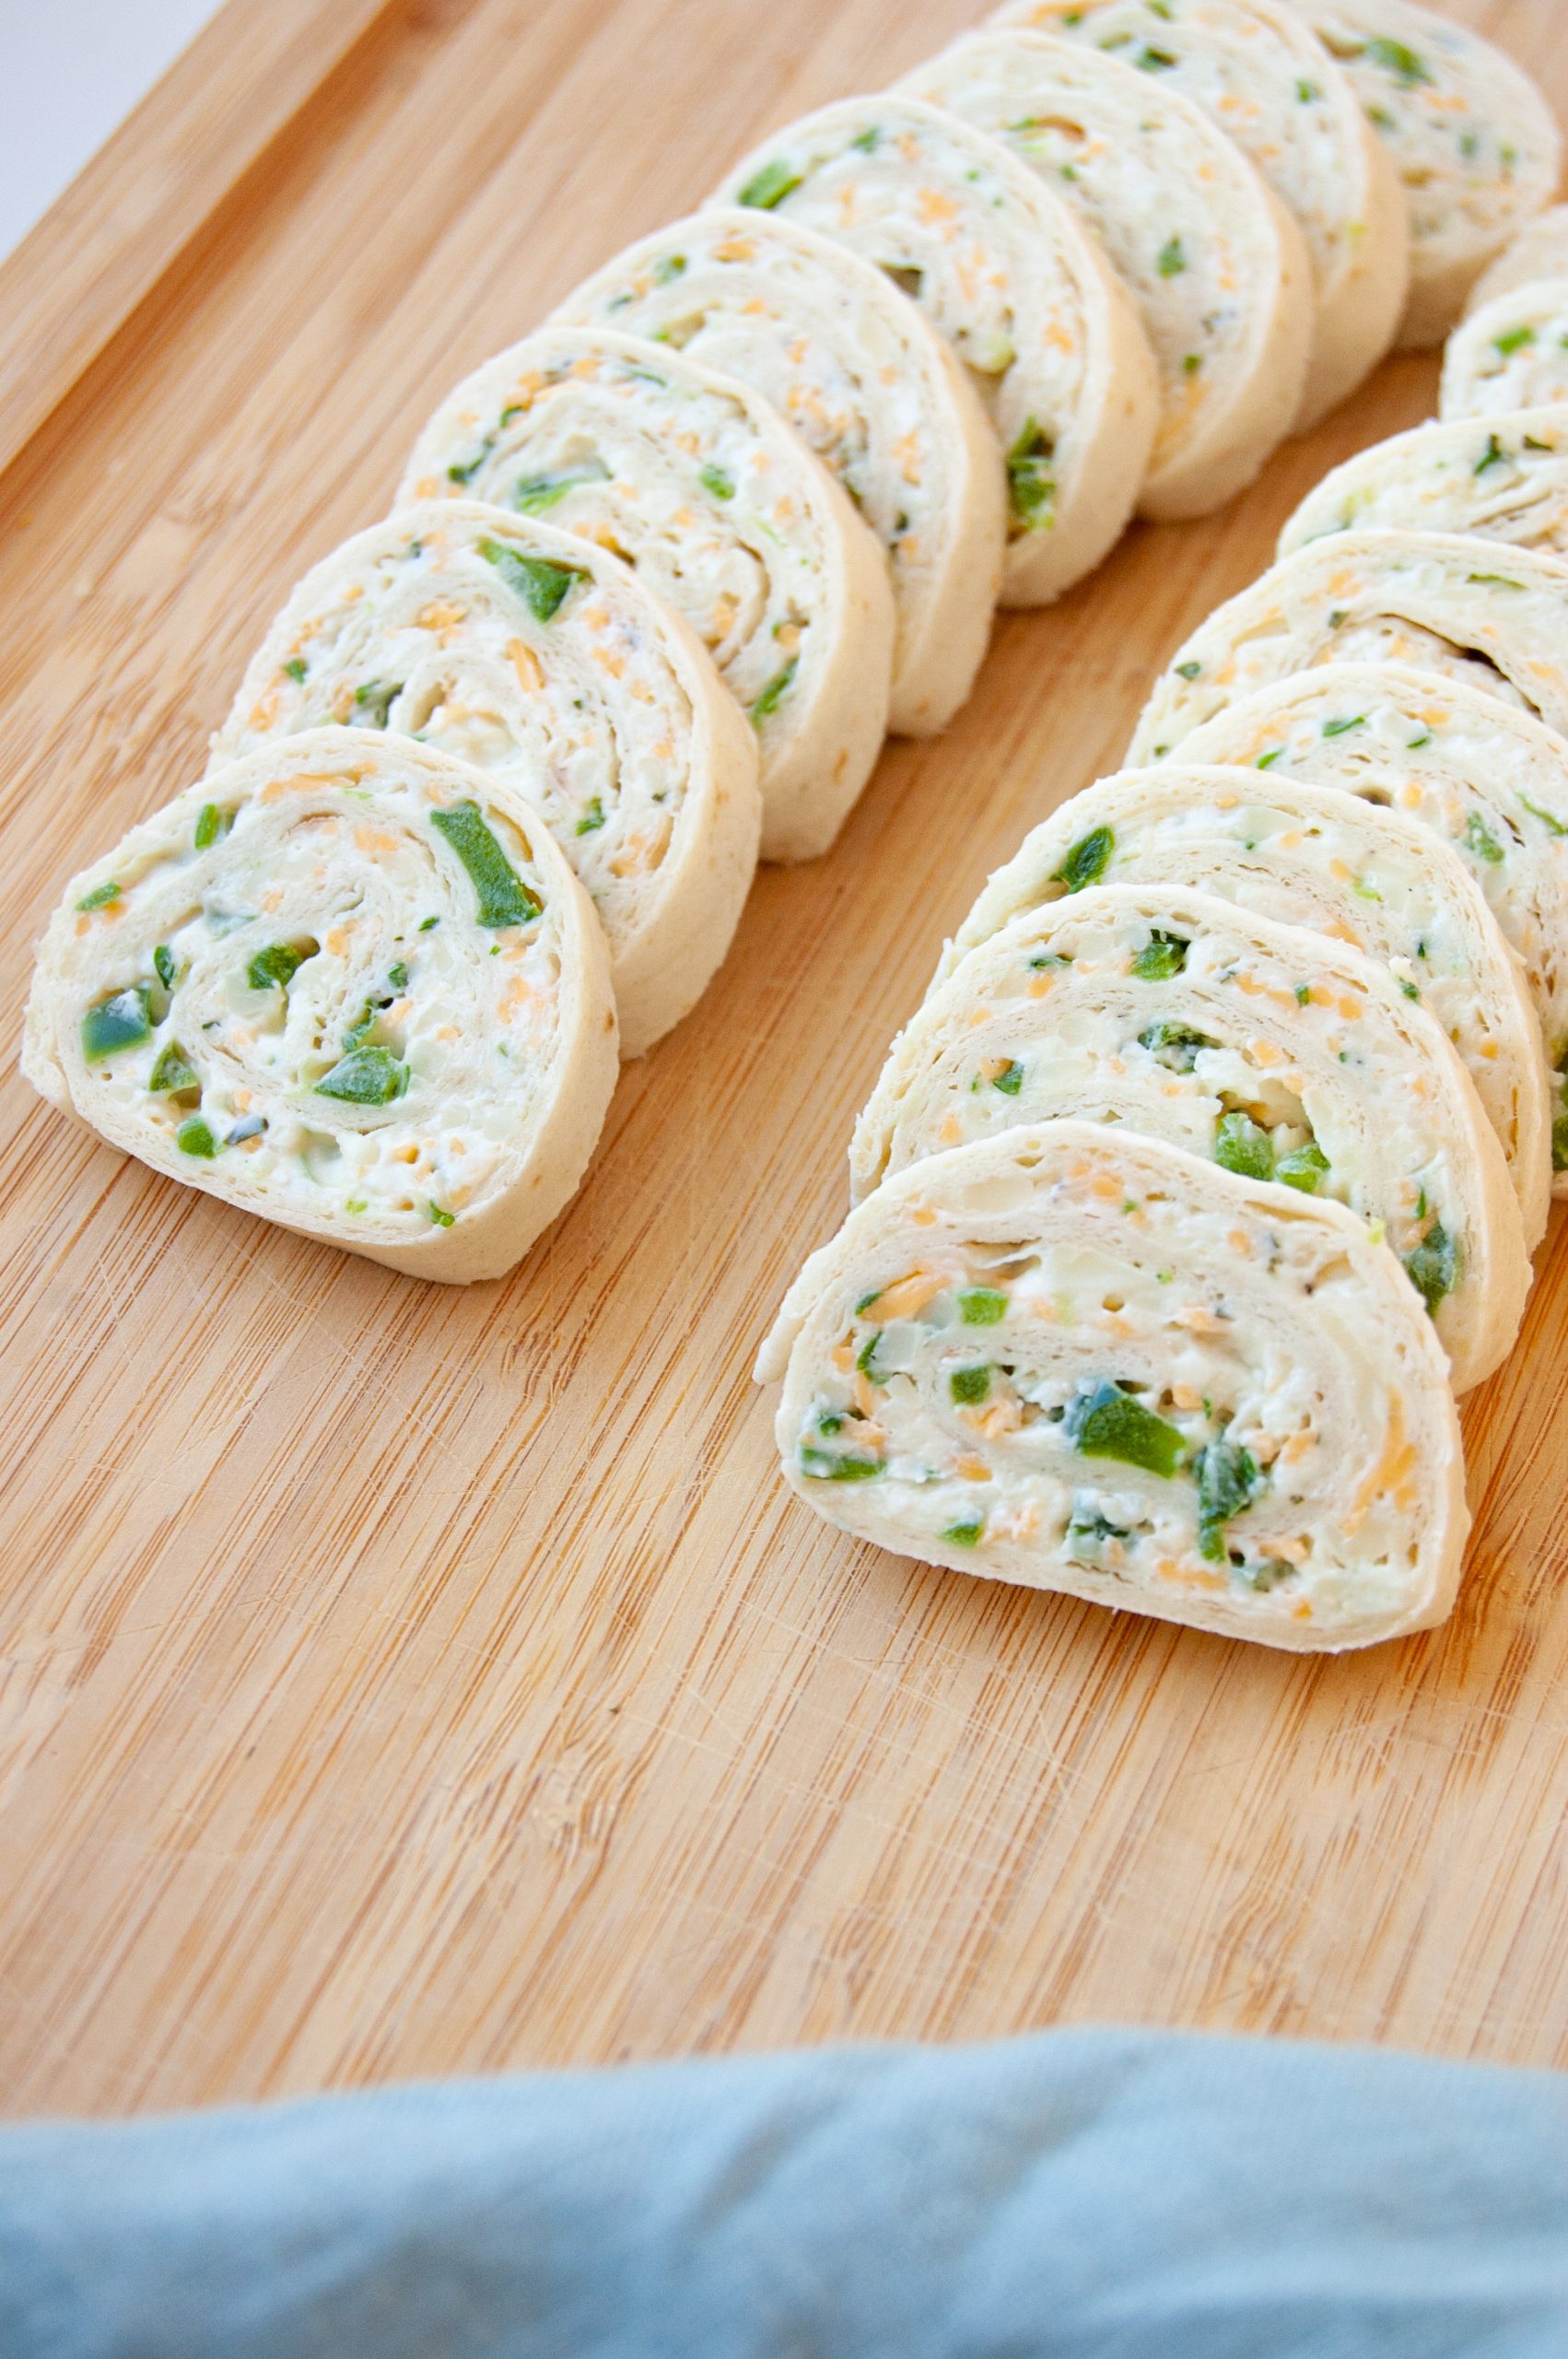 These Ranch Cream Cheese Rollups are an easy and delicious appetizer for any party! Great to make ahead and just a few simple ingredients. Whether you call them rollups or pinwheels, these are bound to be a family favorite for years to come!